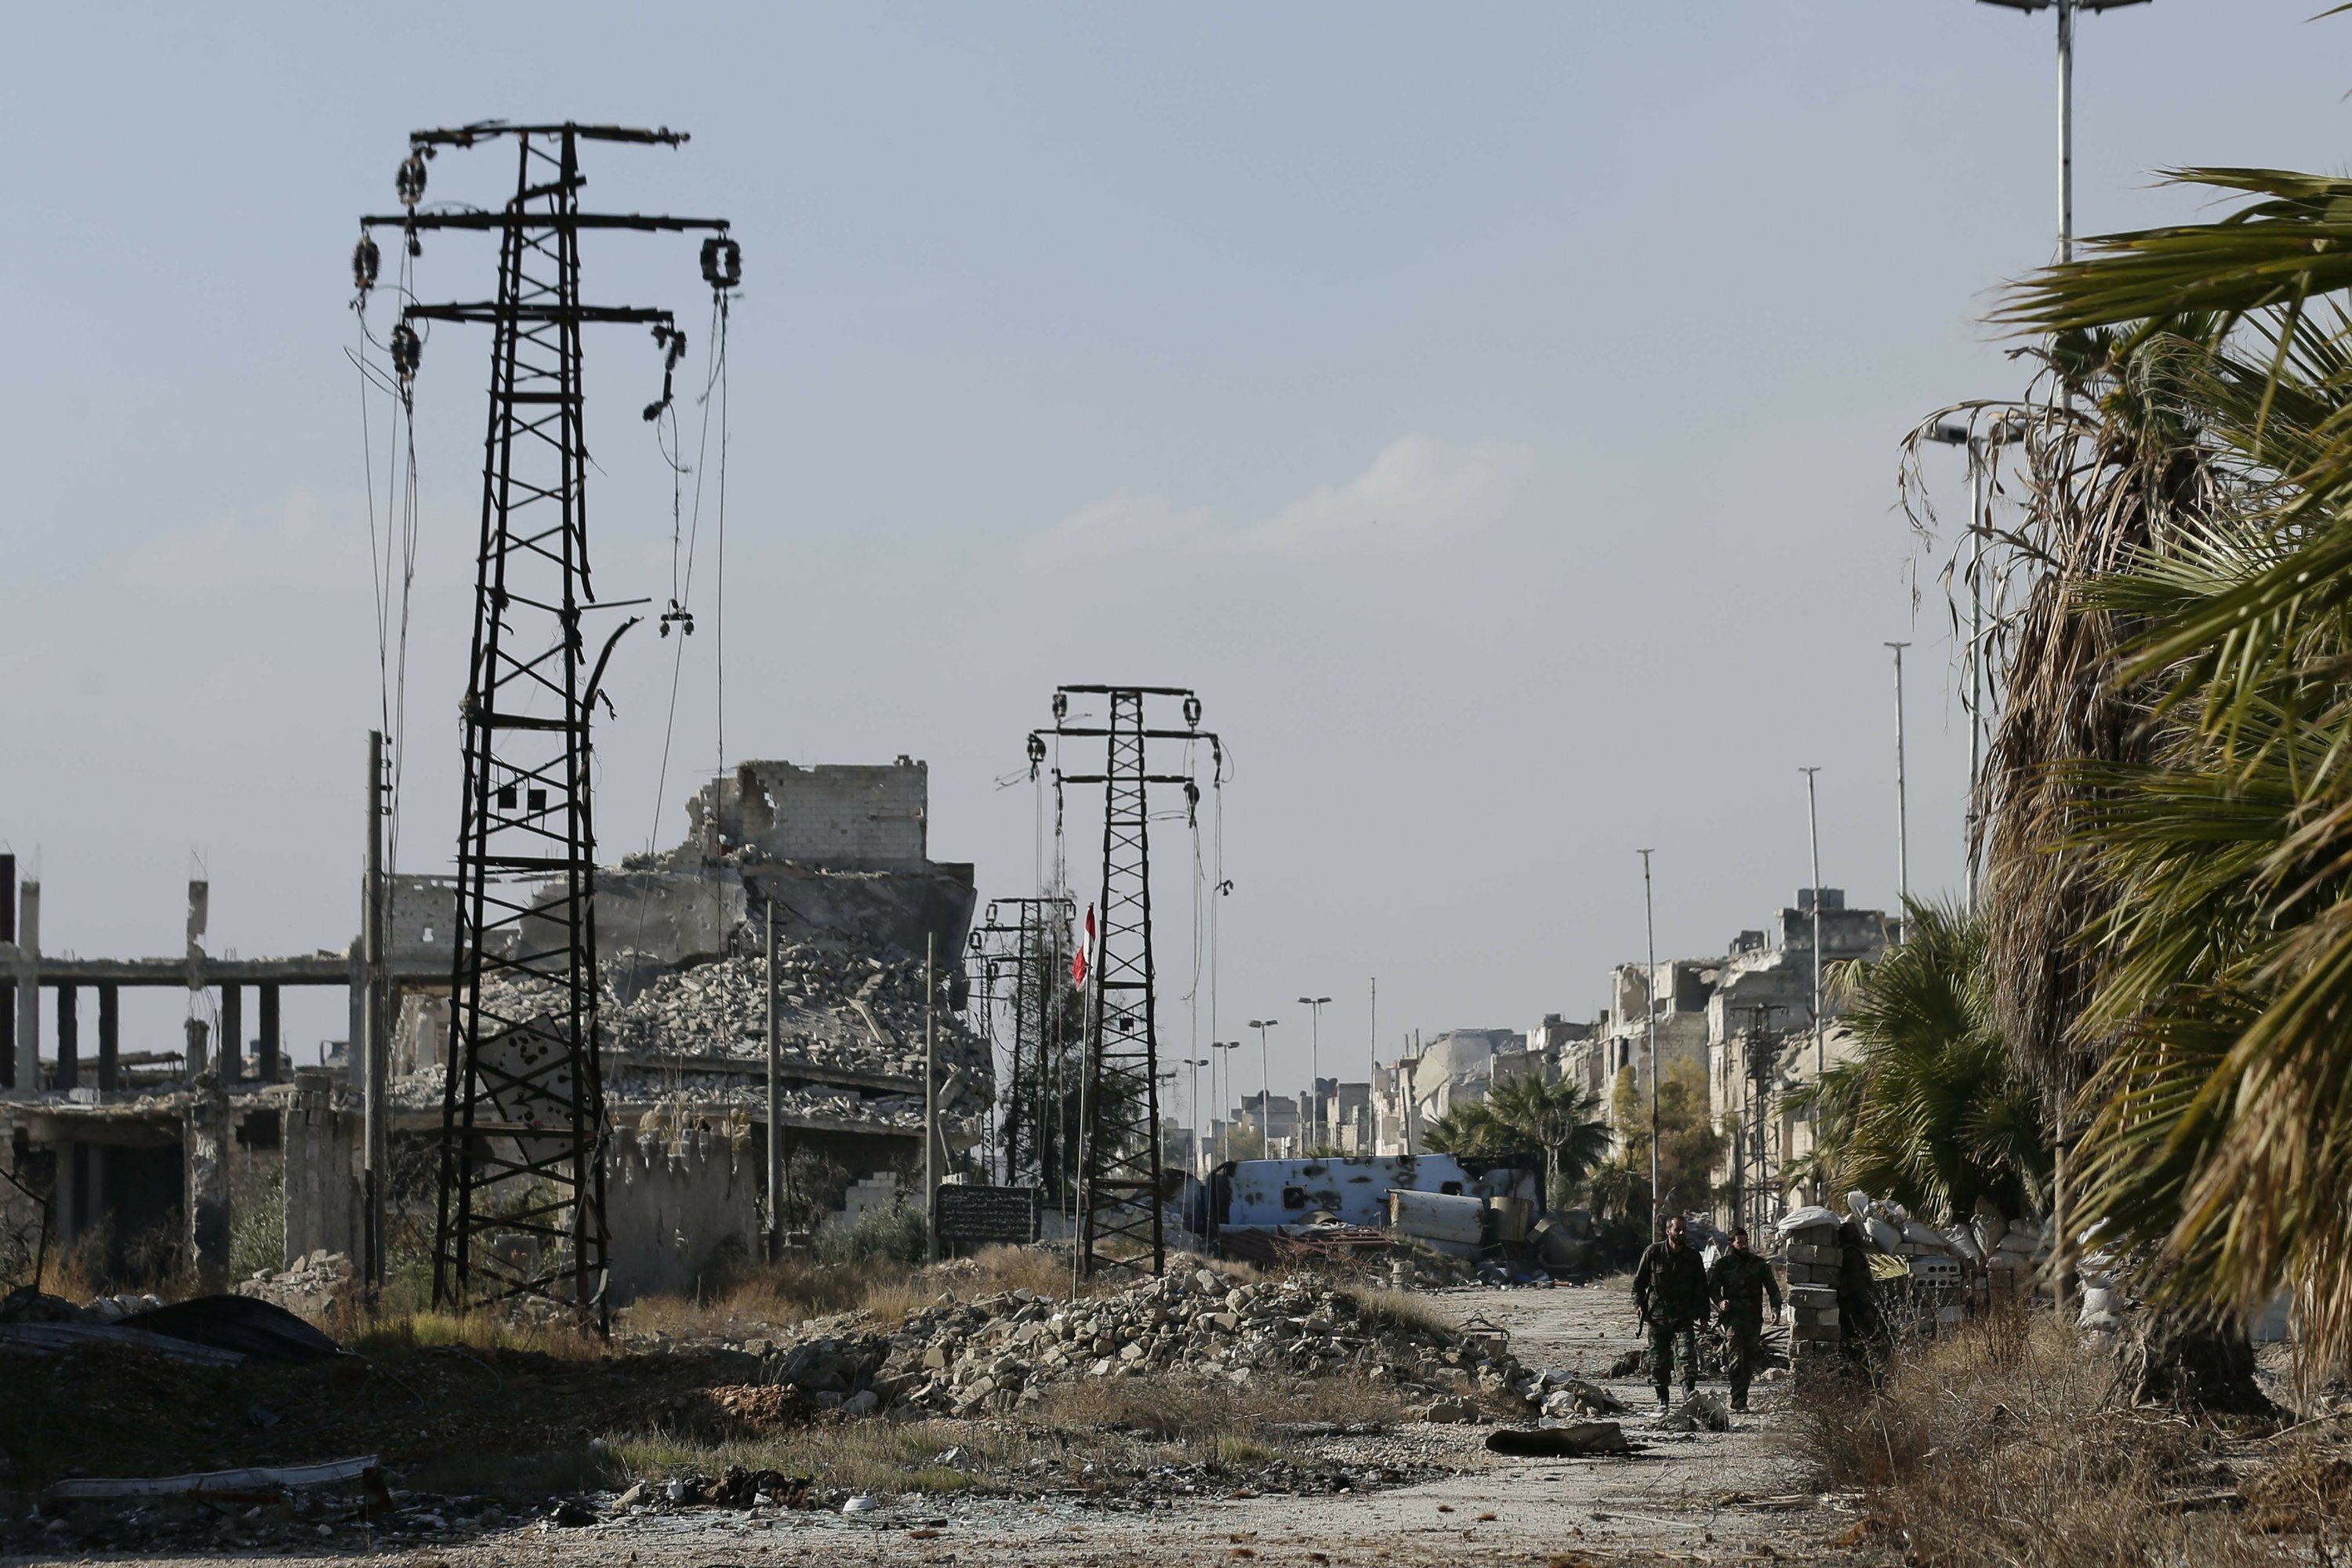 Iranian company signs $115 million contract to repair a Syrian power station